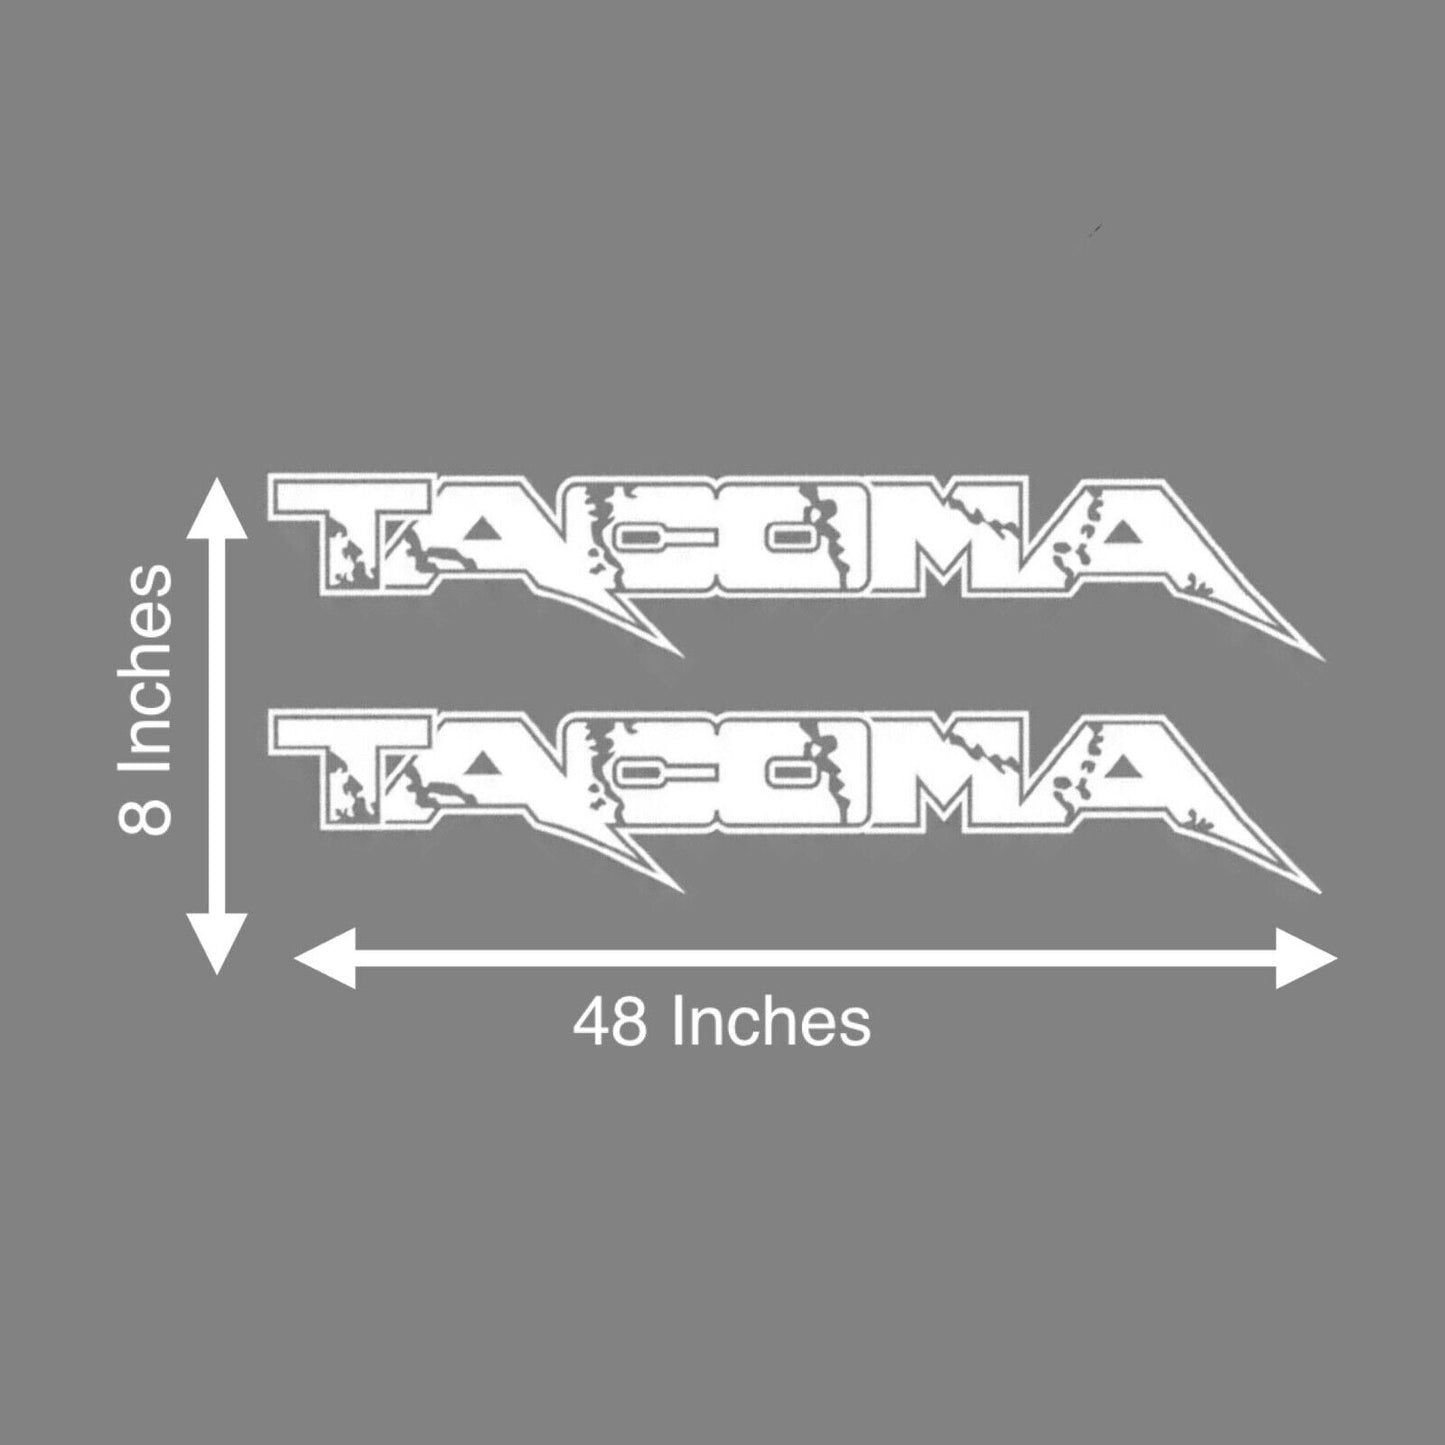 Toyota Tacoma Bed Side Vinyl Decal 48”x8” - 2 Pack (Pair)